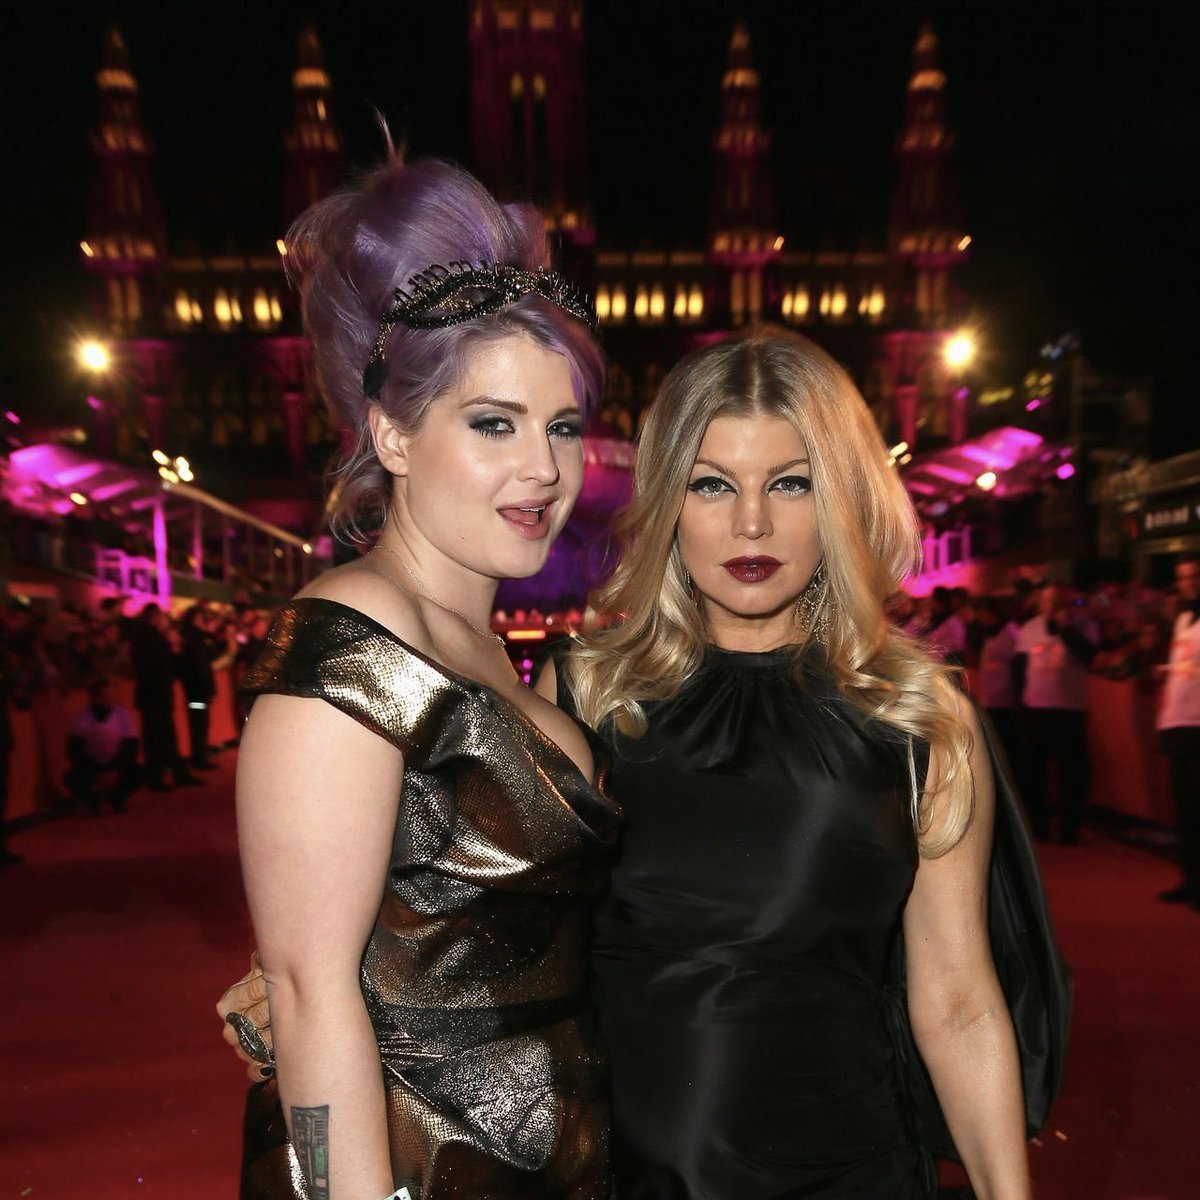 #Fergie and #KellyOsbourne attended the '#LifeBall 2013 - #MagentaCarpet Arrivals' at #CityHall on May 25, 2013 in #Vienna, #Austria.